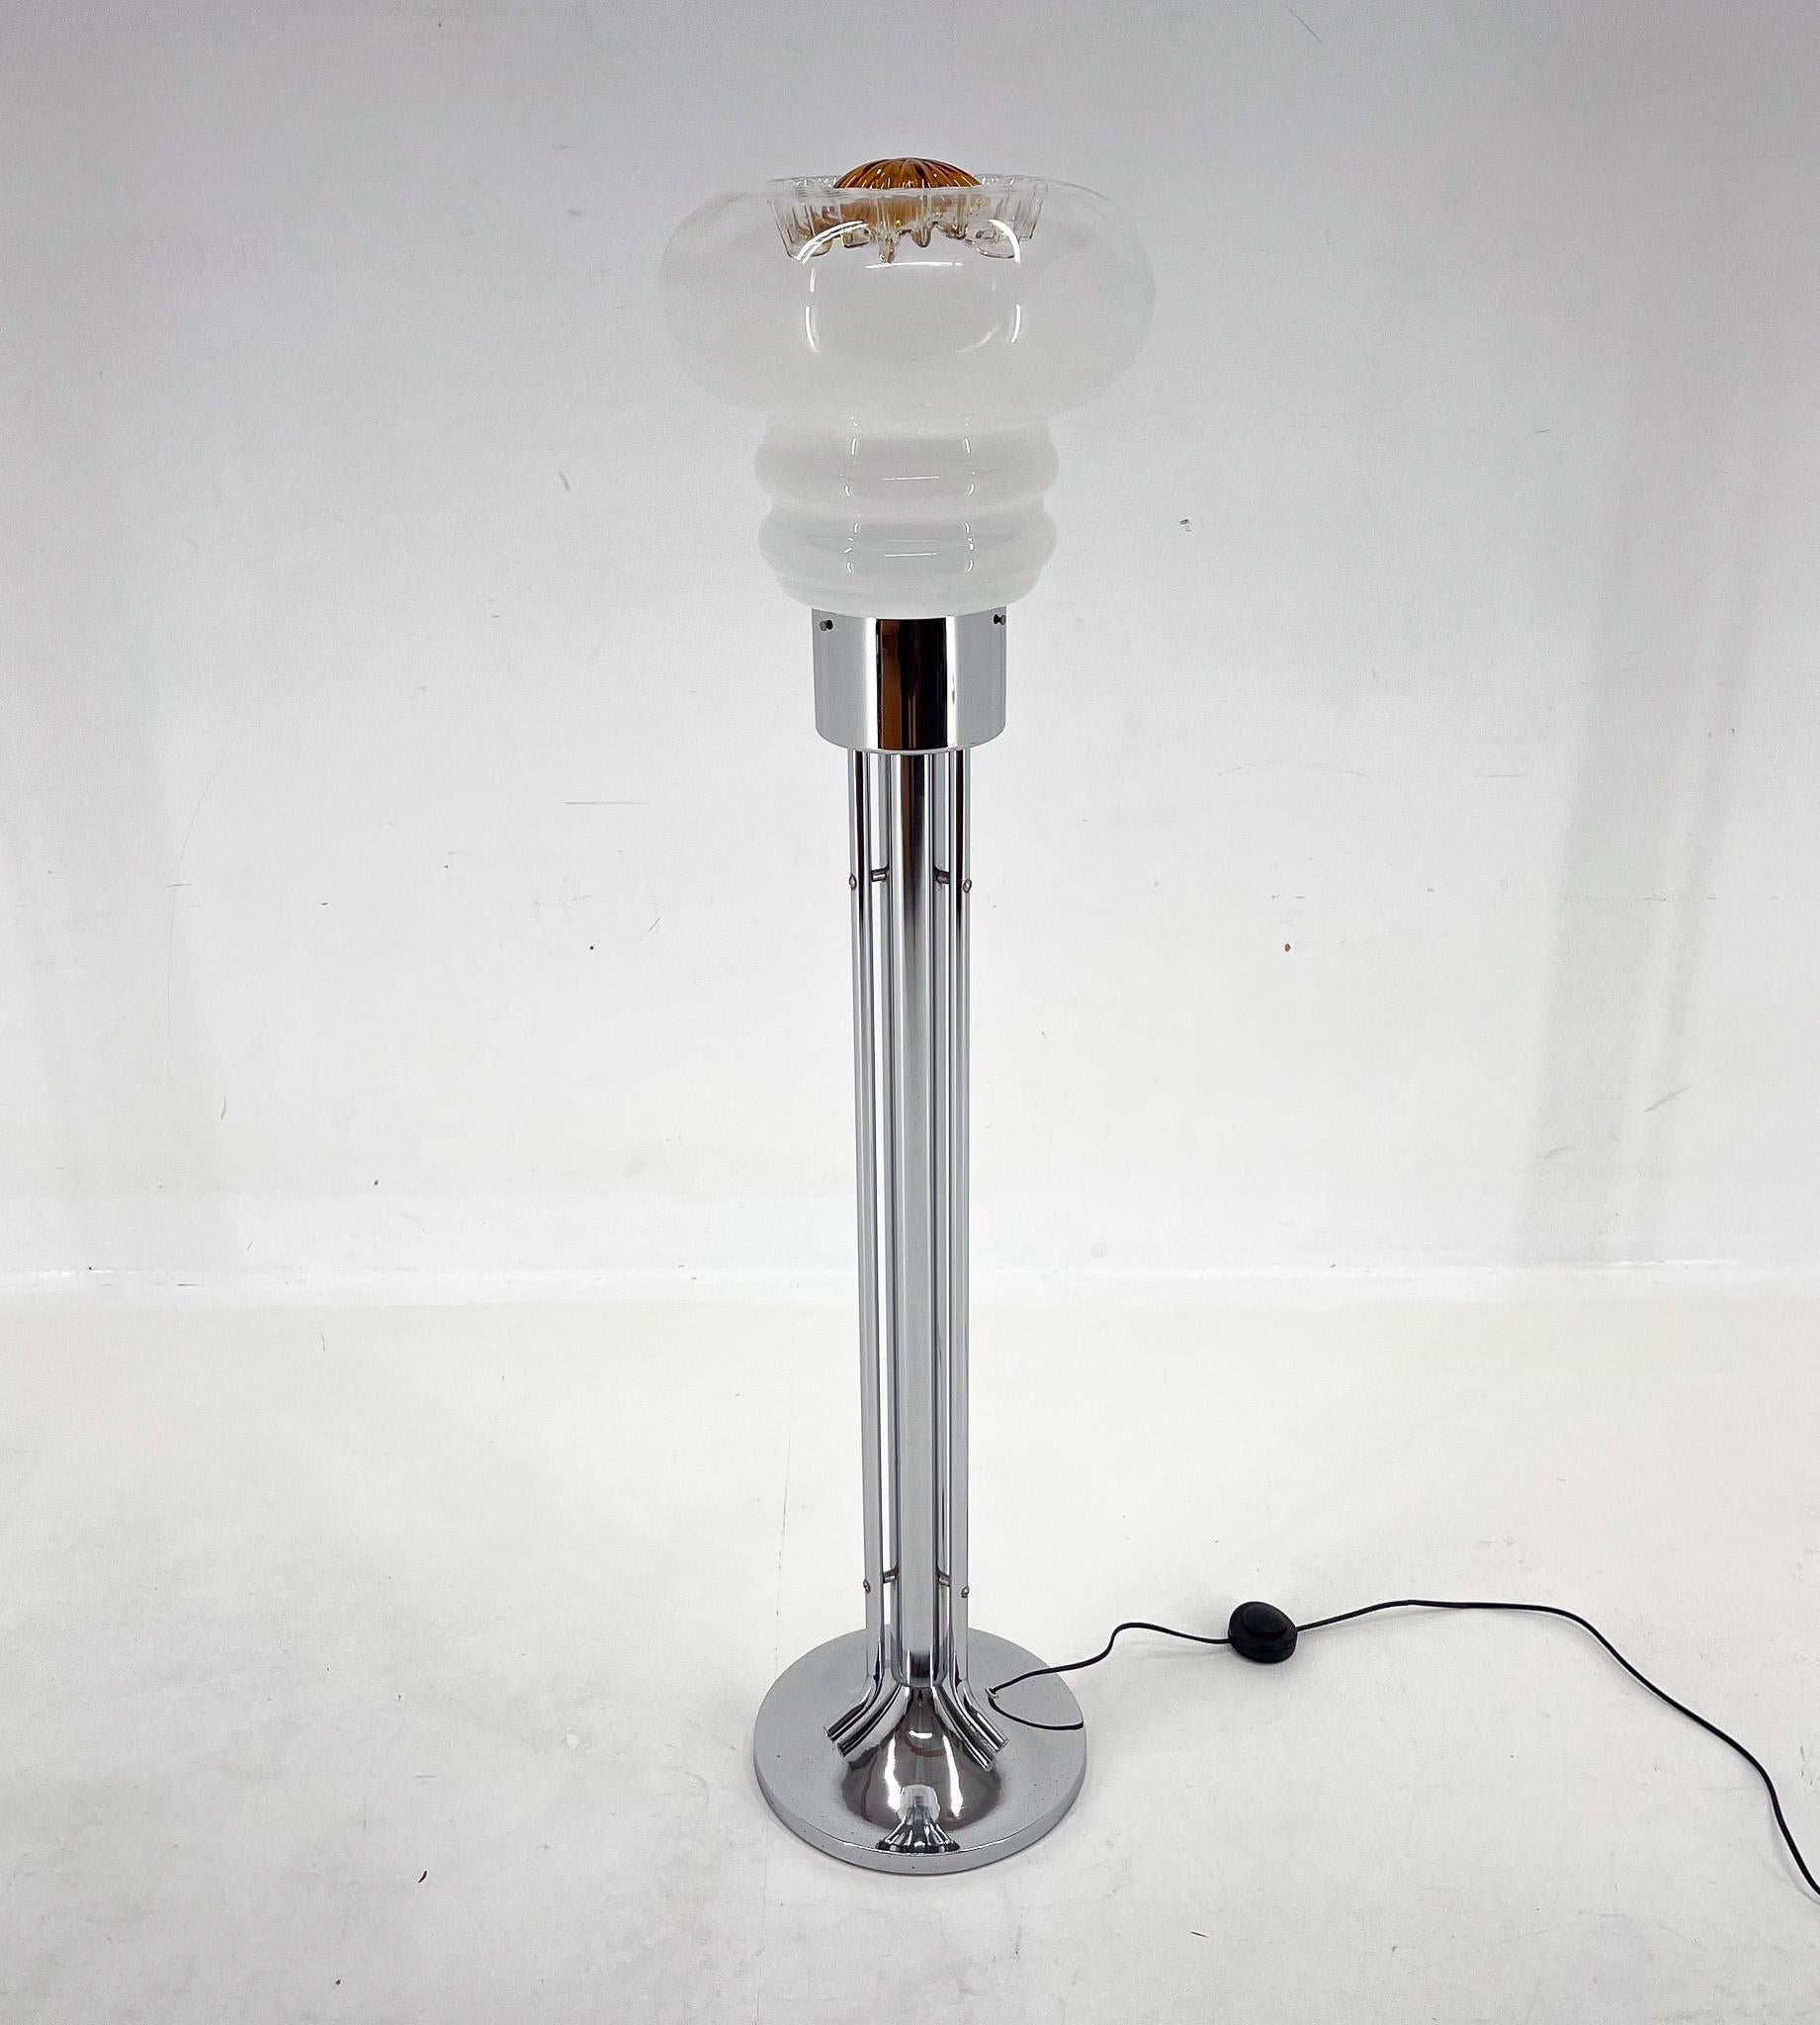 Vintage floor lamp made of hand-blown Murano glass made in Italy in the 1970s. The lamp has been restored and has new wiring with step-on switch.